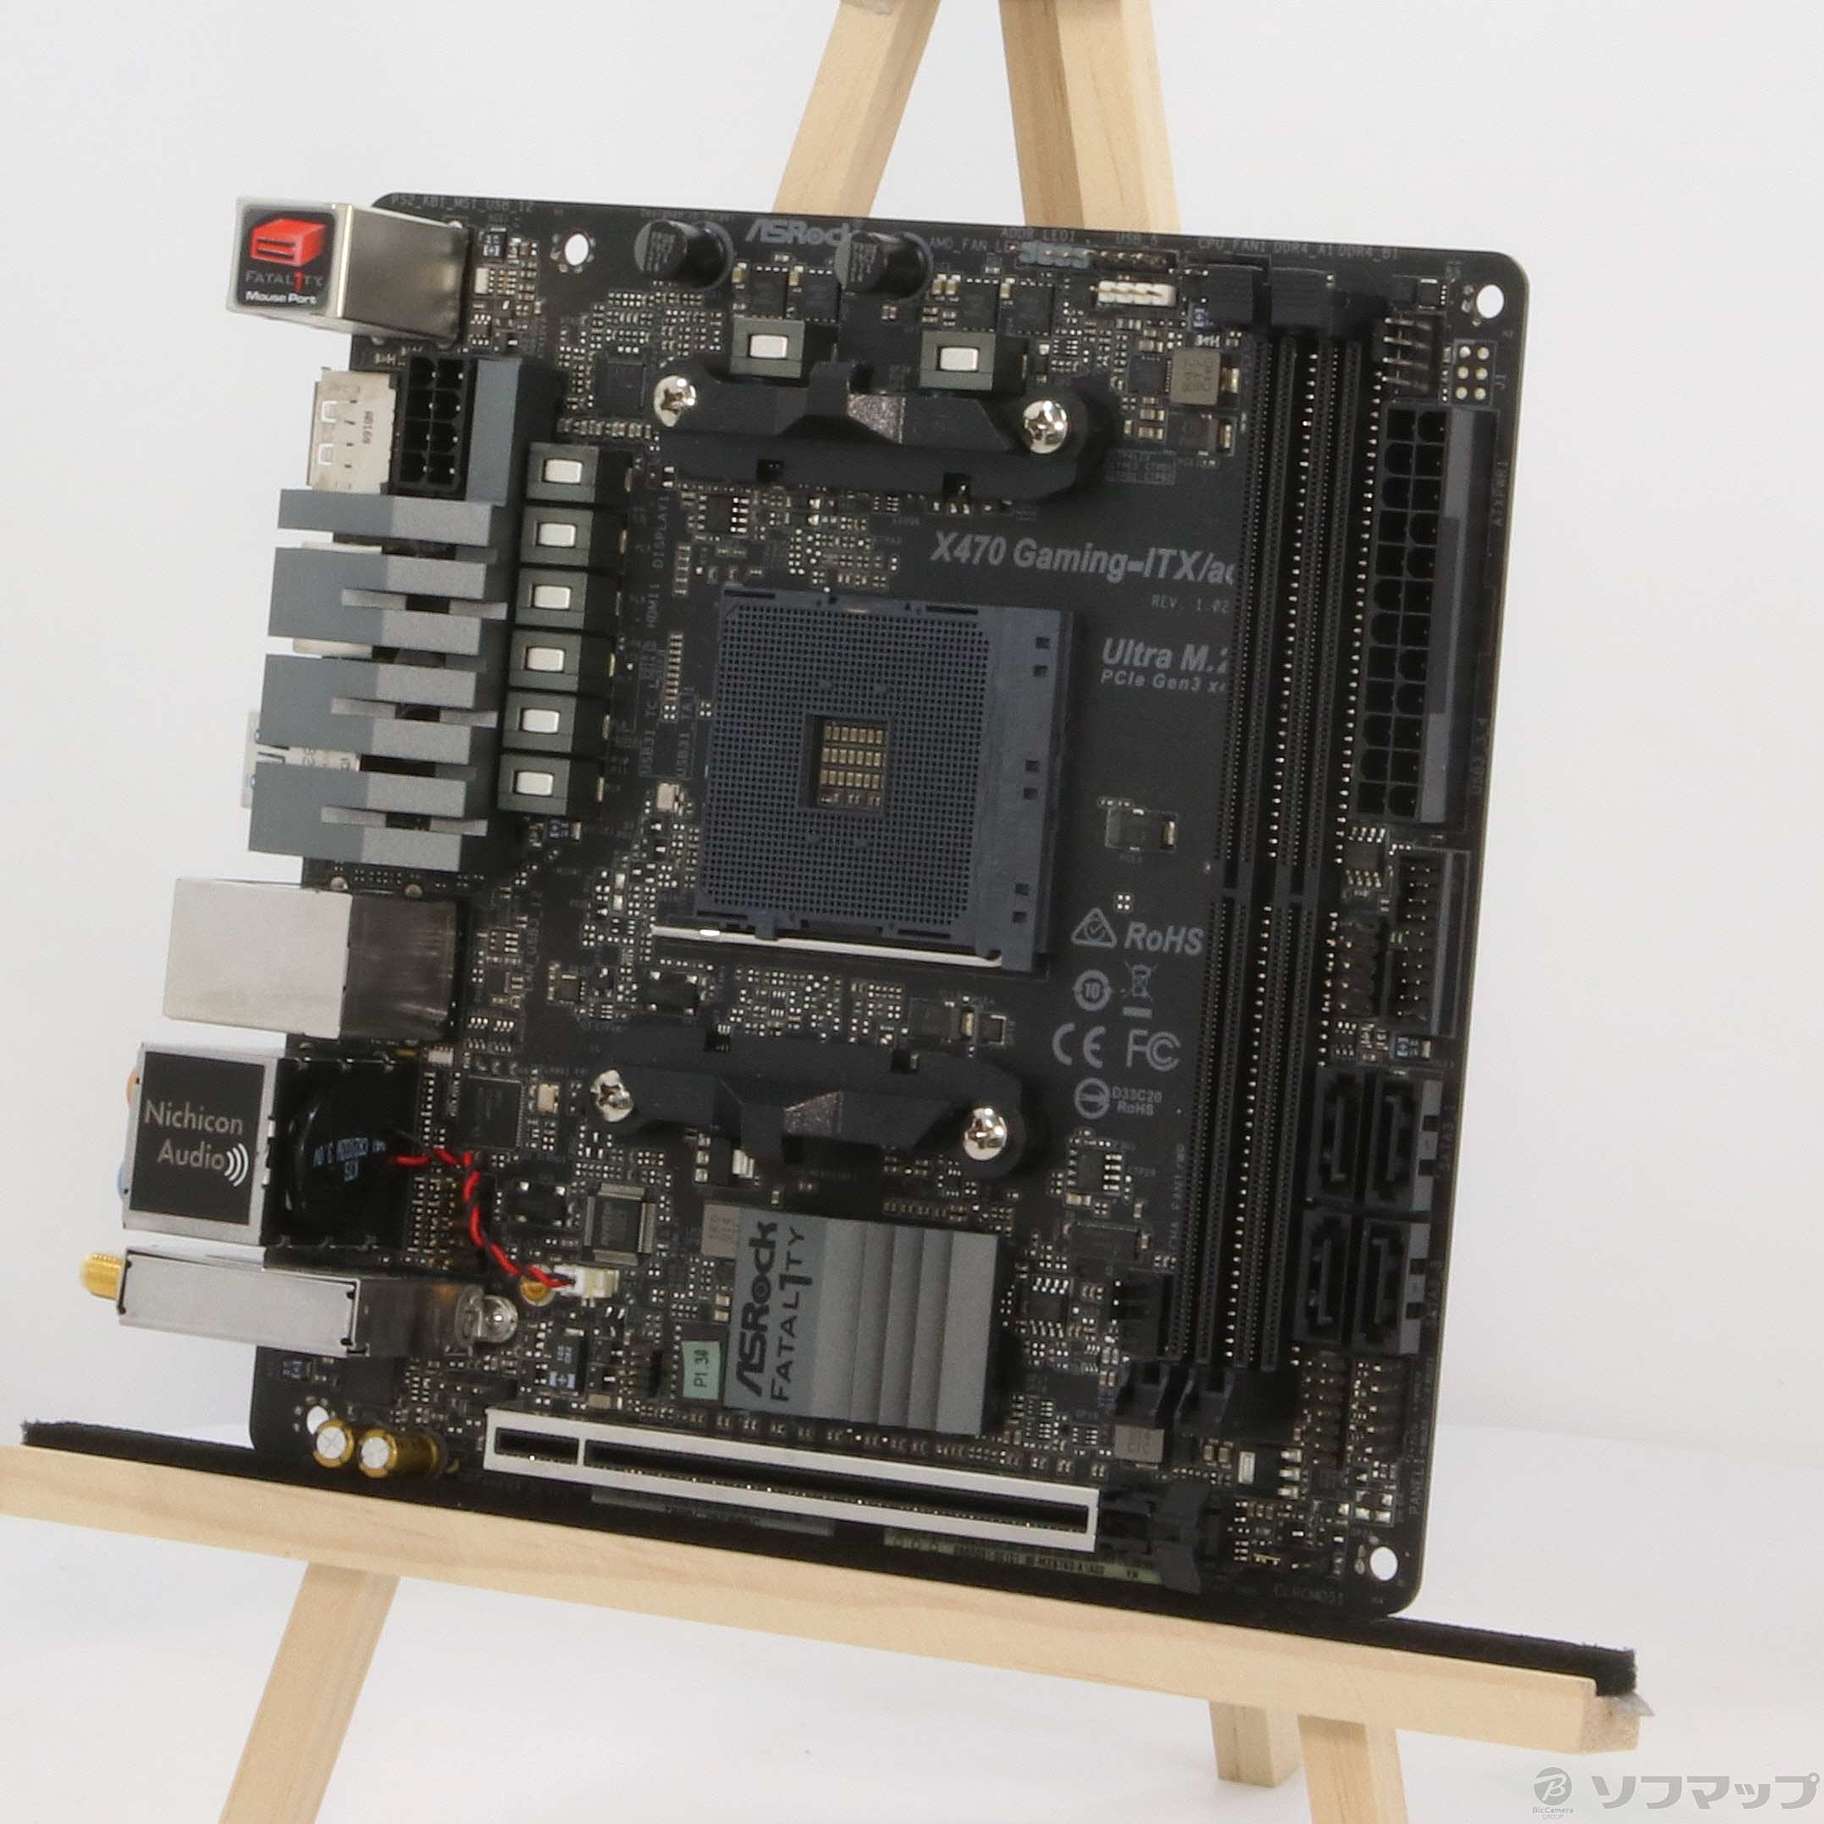 Zoologisk have Tragisk tolerance 中古】Fatal1ty X470 Gaming-ITX／ac [2133038517863] - リコレ！|ソフマップの中古通販サイト